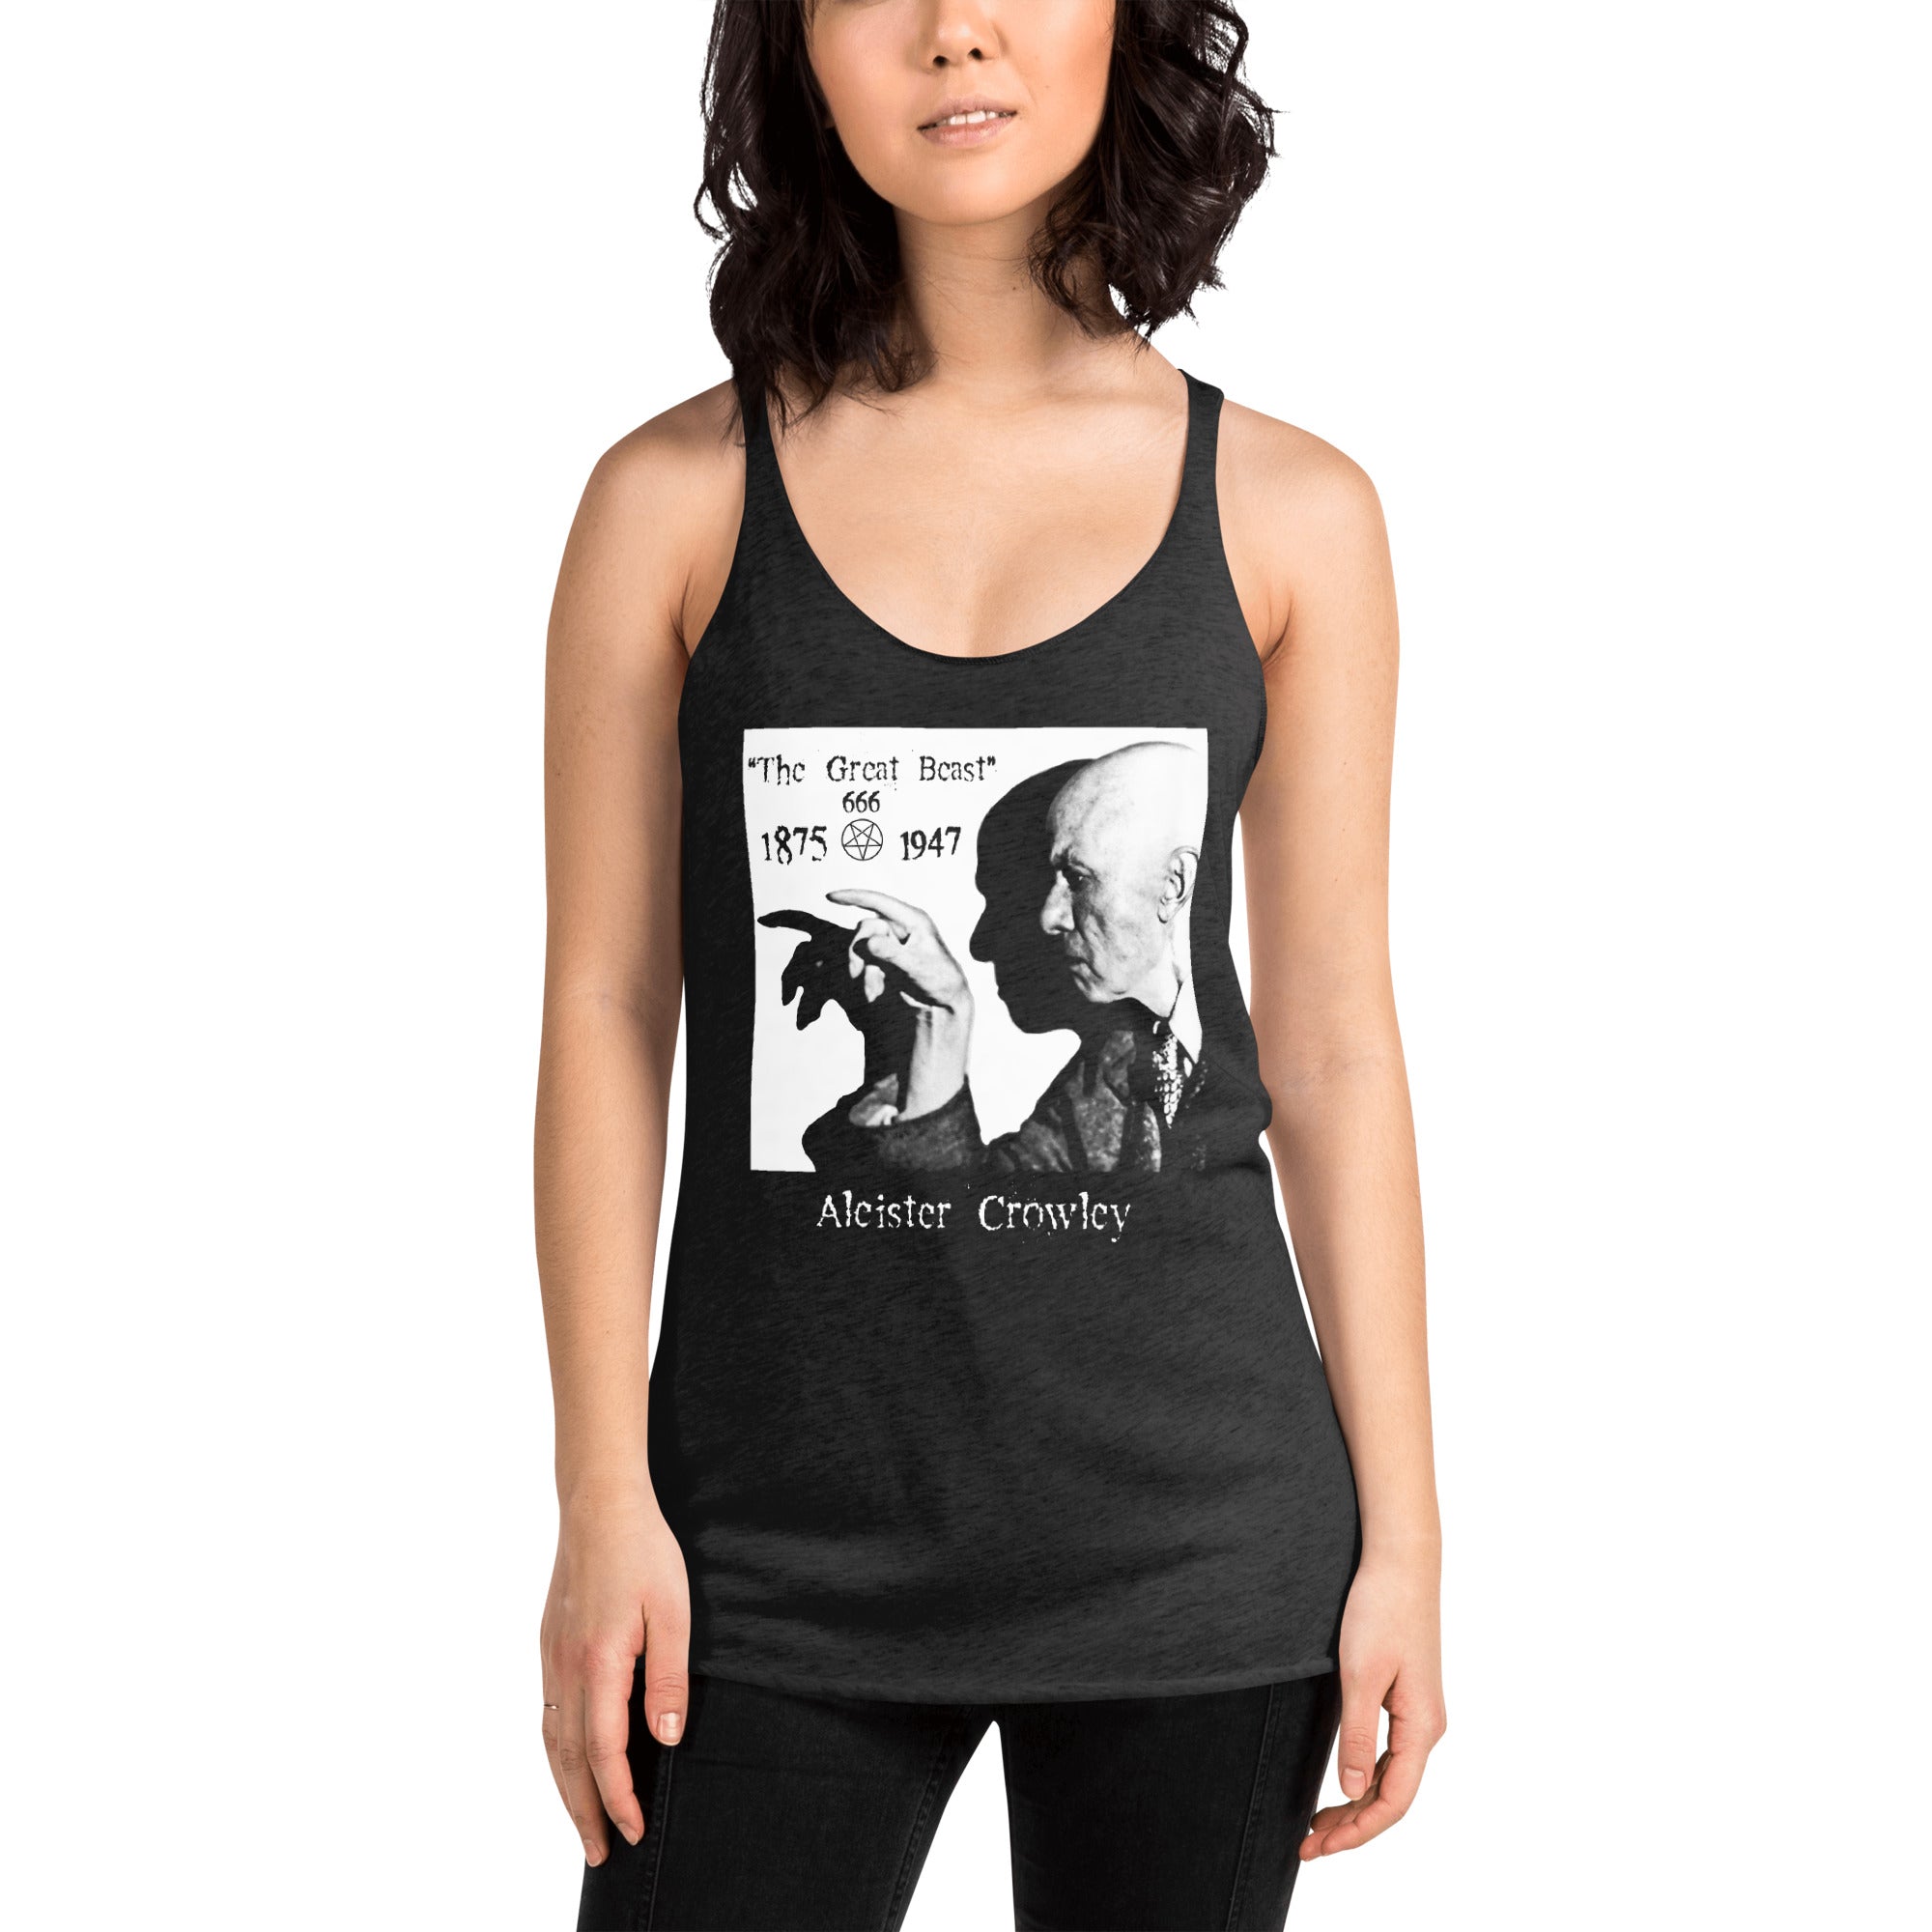 Aleister Crowley Infamous Occult Leader of Thelema Sex Magic Black Women's Racerback Tank - Edge of Life Designs